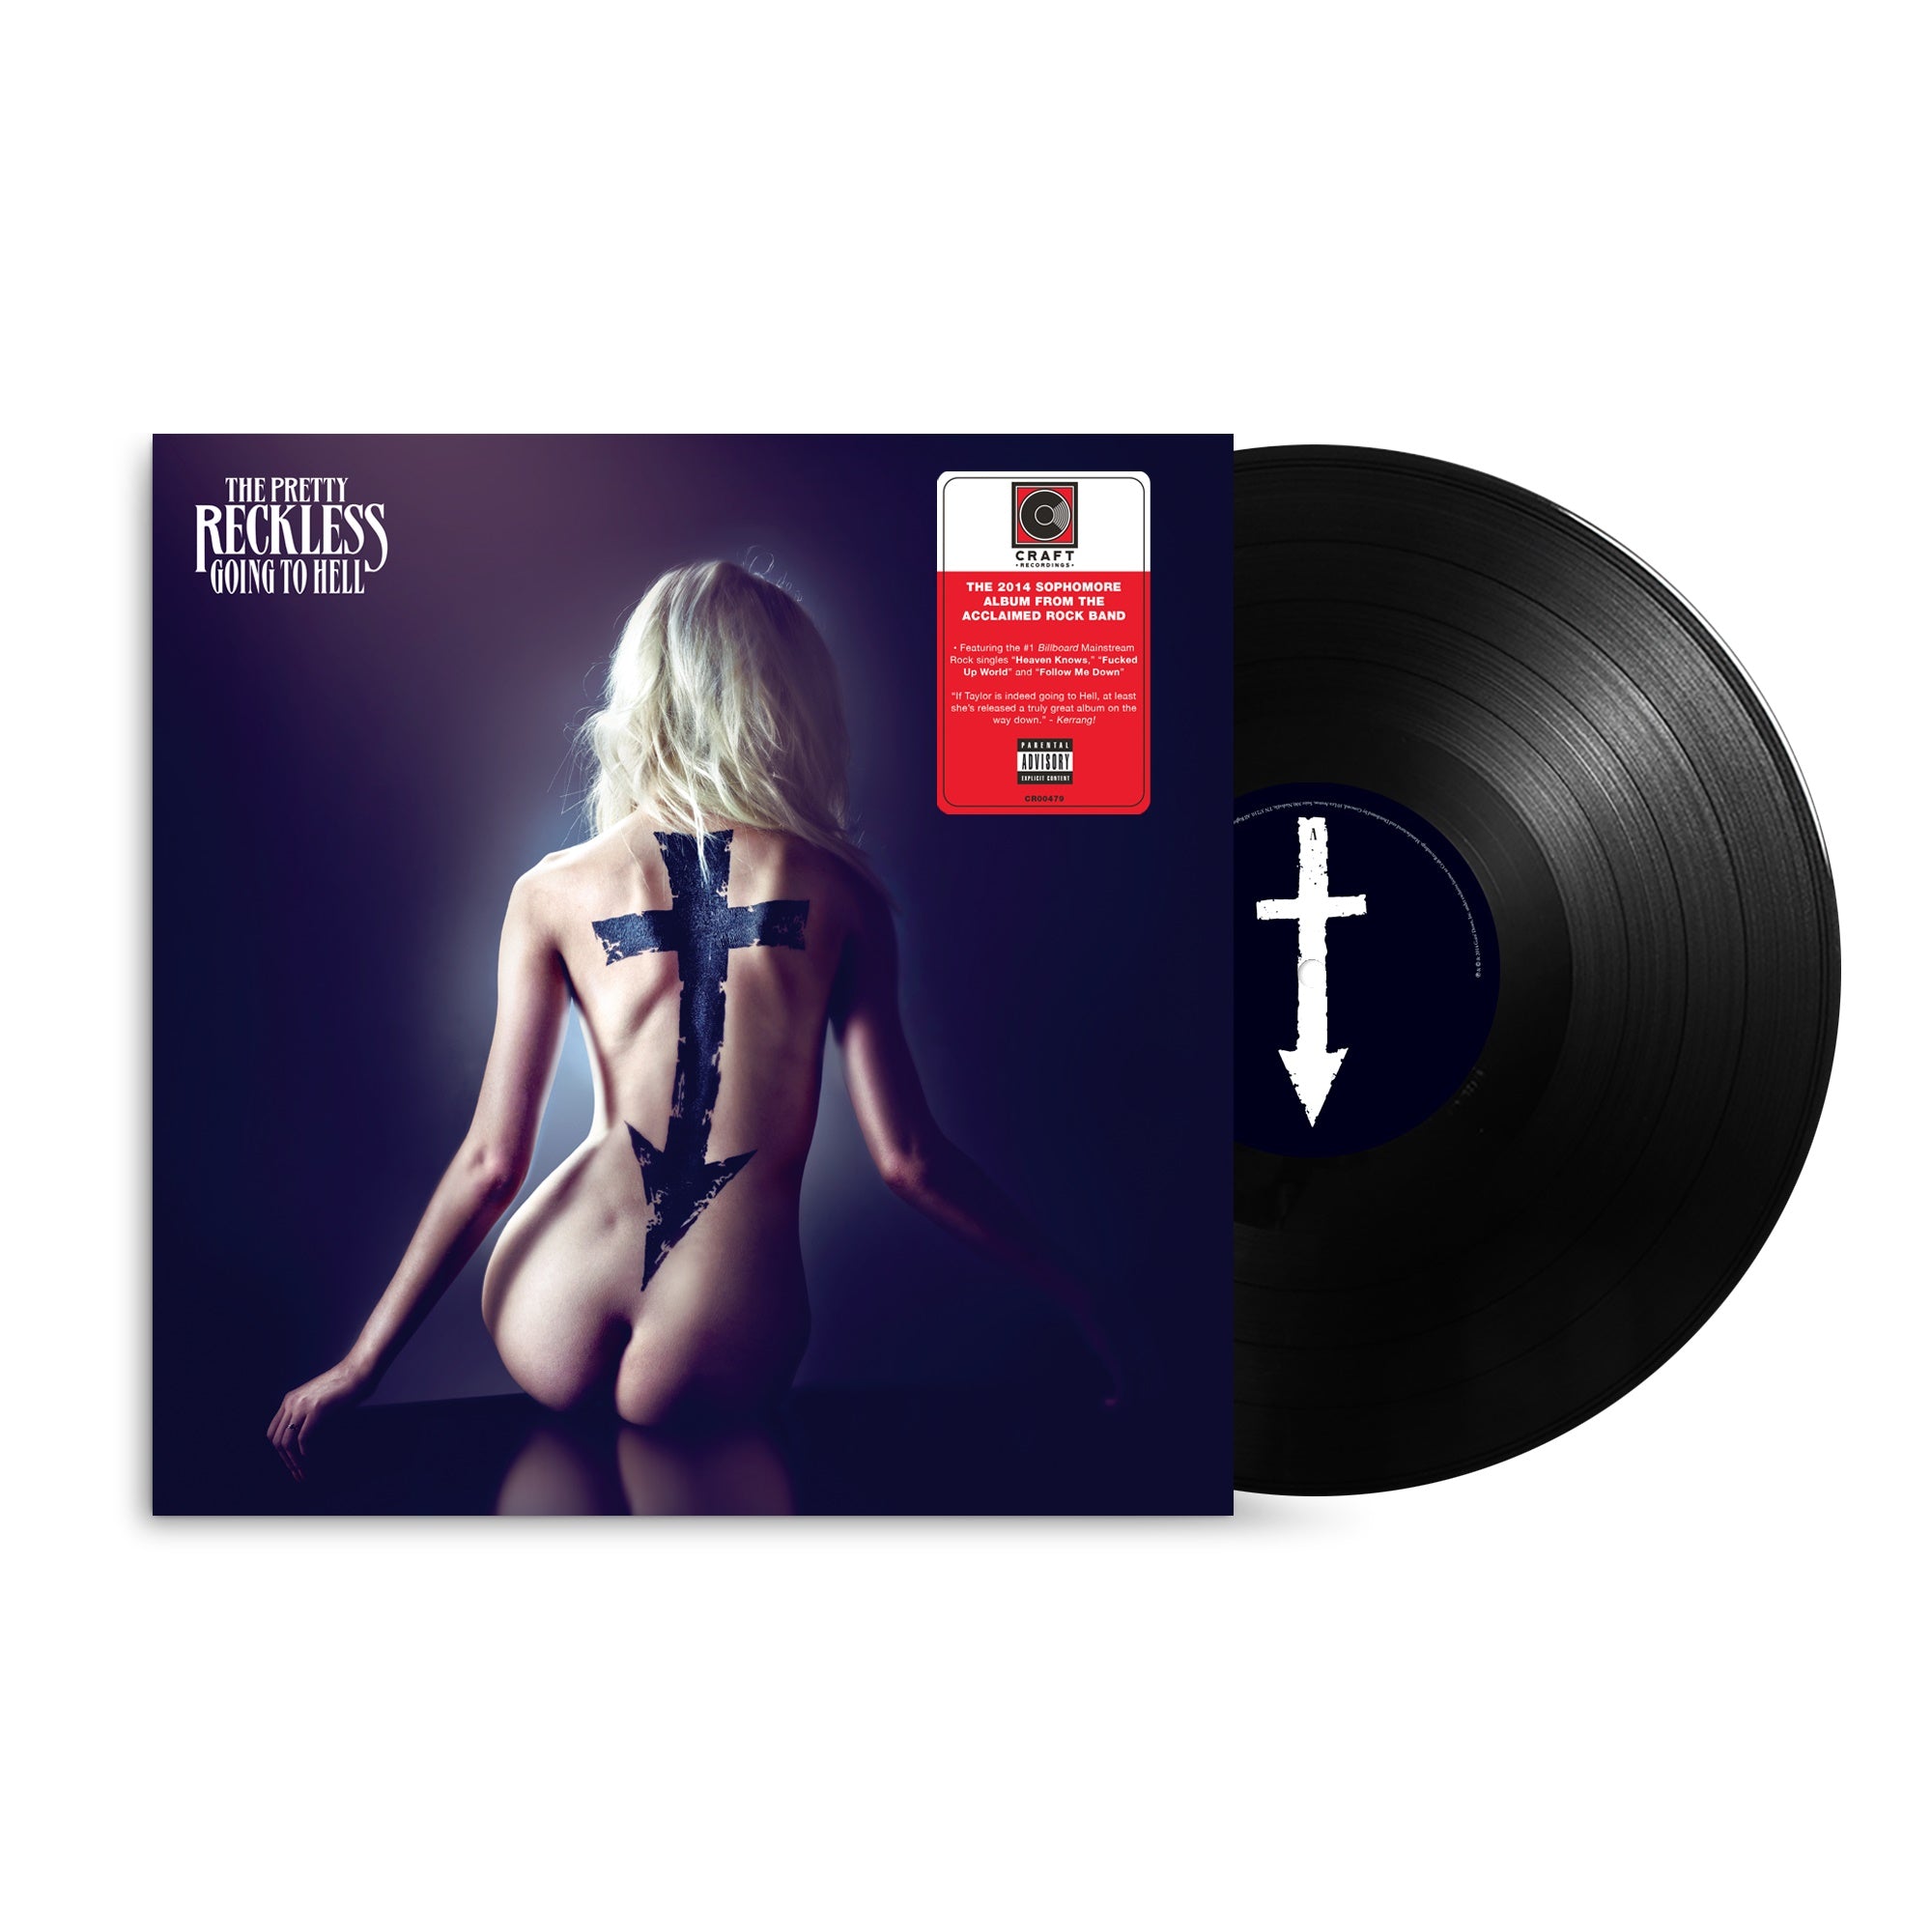 The Pretty Reckless | Going To Hell [Explicit Content] (Gatefold LP Jacket) | LP